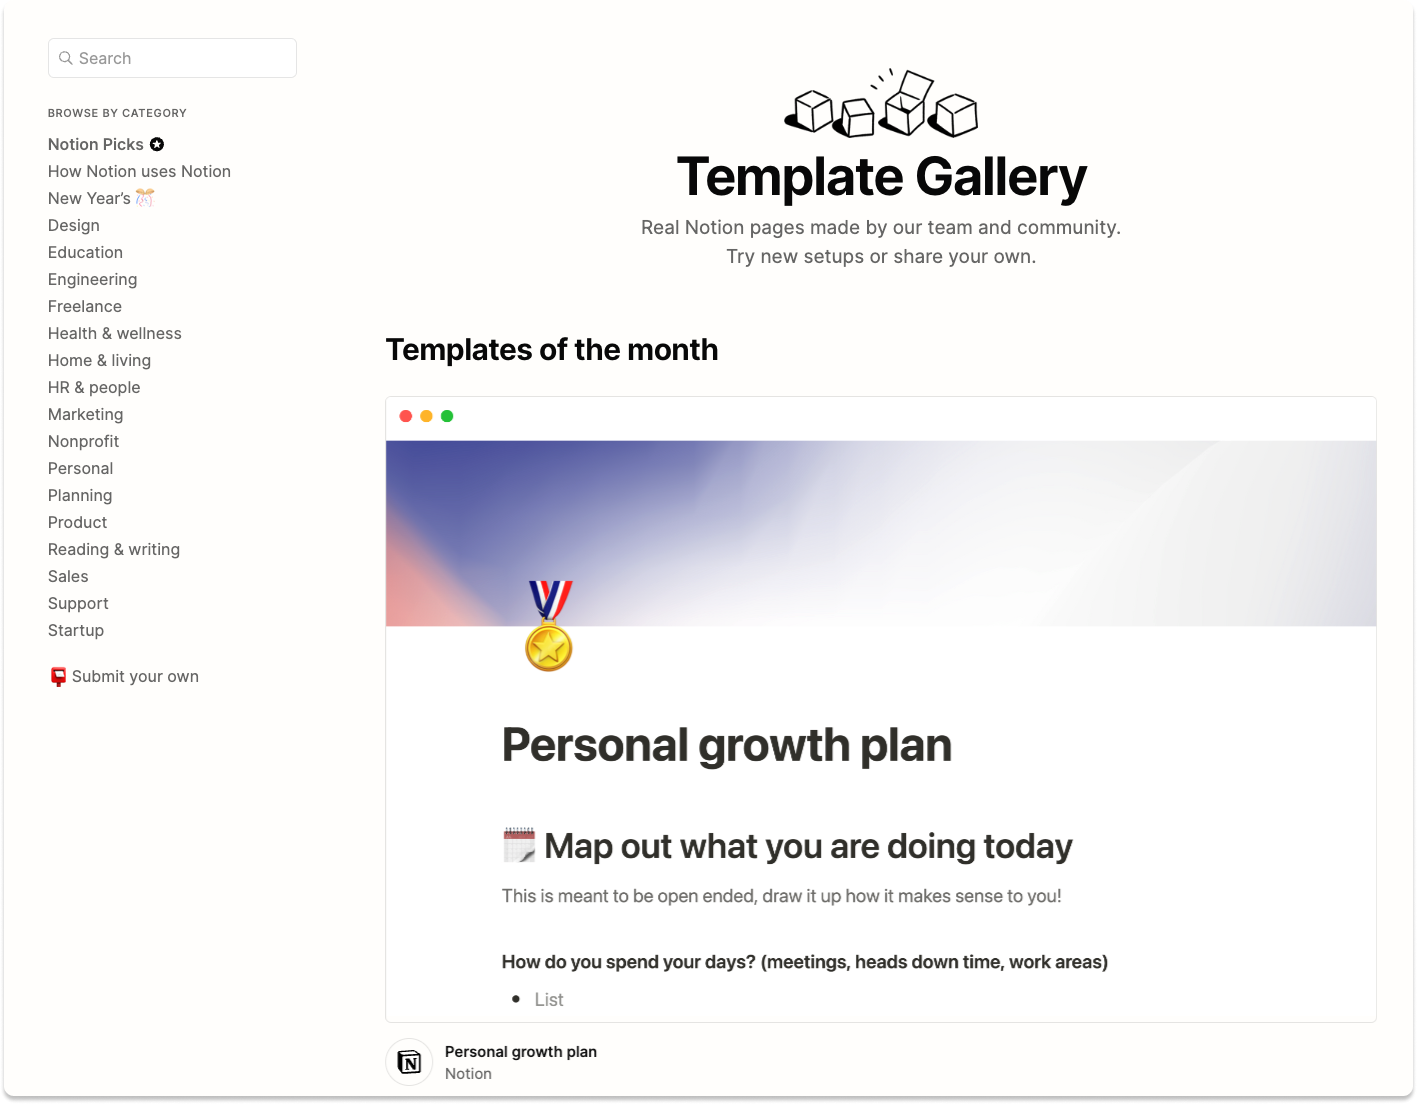 Landing page of the notion template gallery where you can search for and find useful templates.